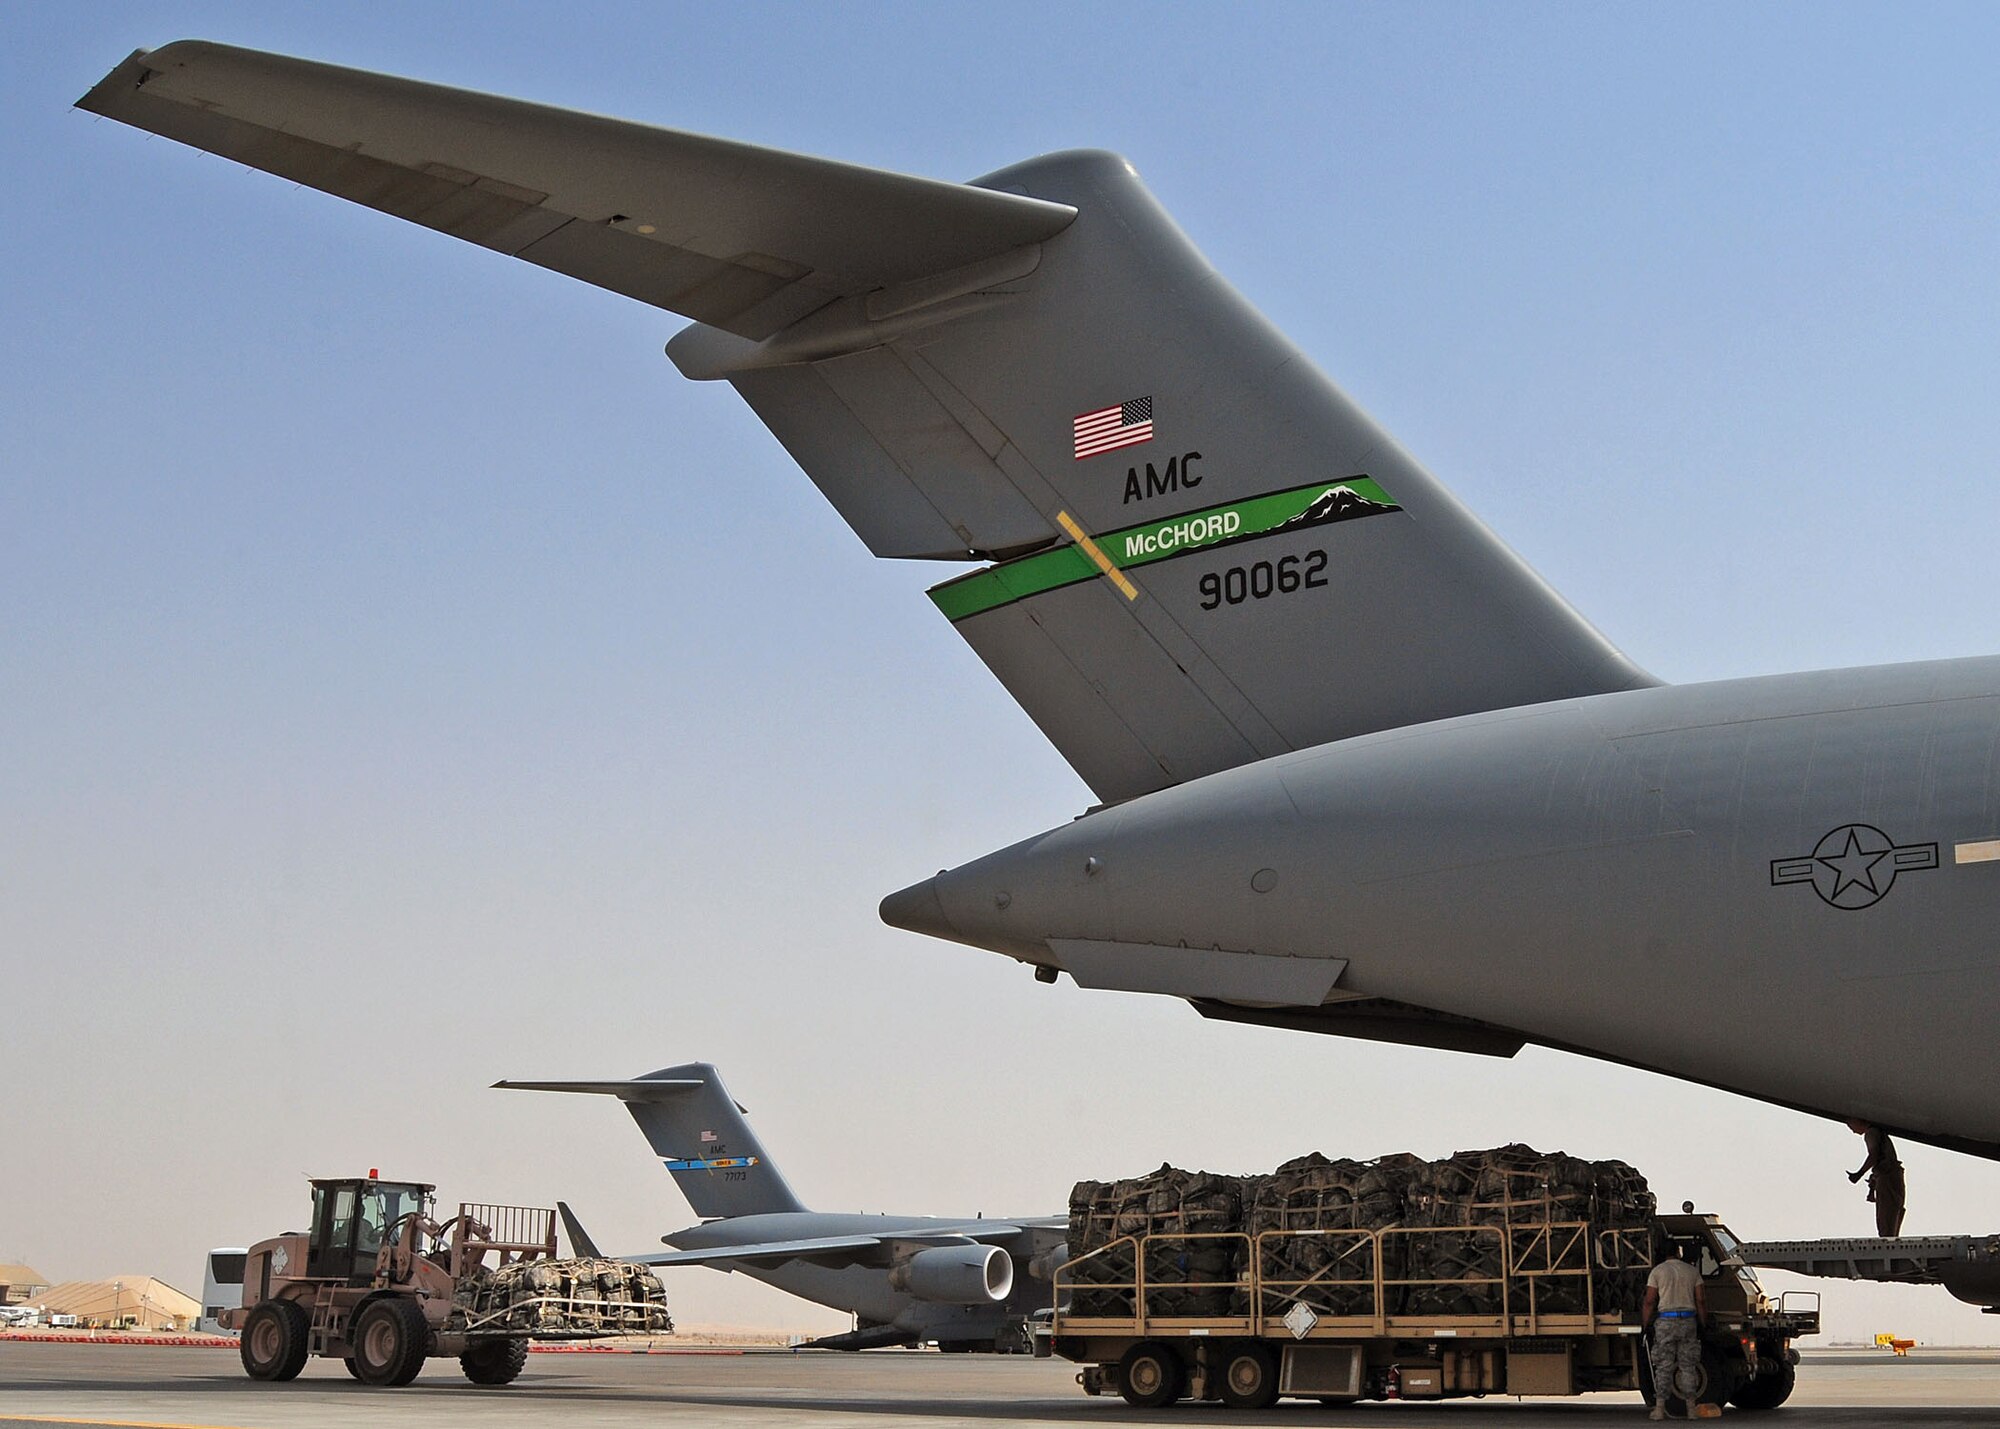 SOUTHWEST ASIA -- 386th Expeditionary Logistics Readiness Squadron 10K all terrain forklift (left) and 25K loader move into position to load a 816th Expeditionary Airlift Squadron C-17 Globemaster III on the 386th Air Expeditionary Wing parking ramp at an undisclosed location in Southwest Asia Aug. 21, 2009.  The C-17 is deployed from McChord Air Force Base, Wash.  (U.S. Air Force photo / Tech Sgt. Tony Tolley)